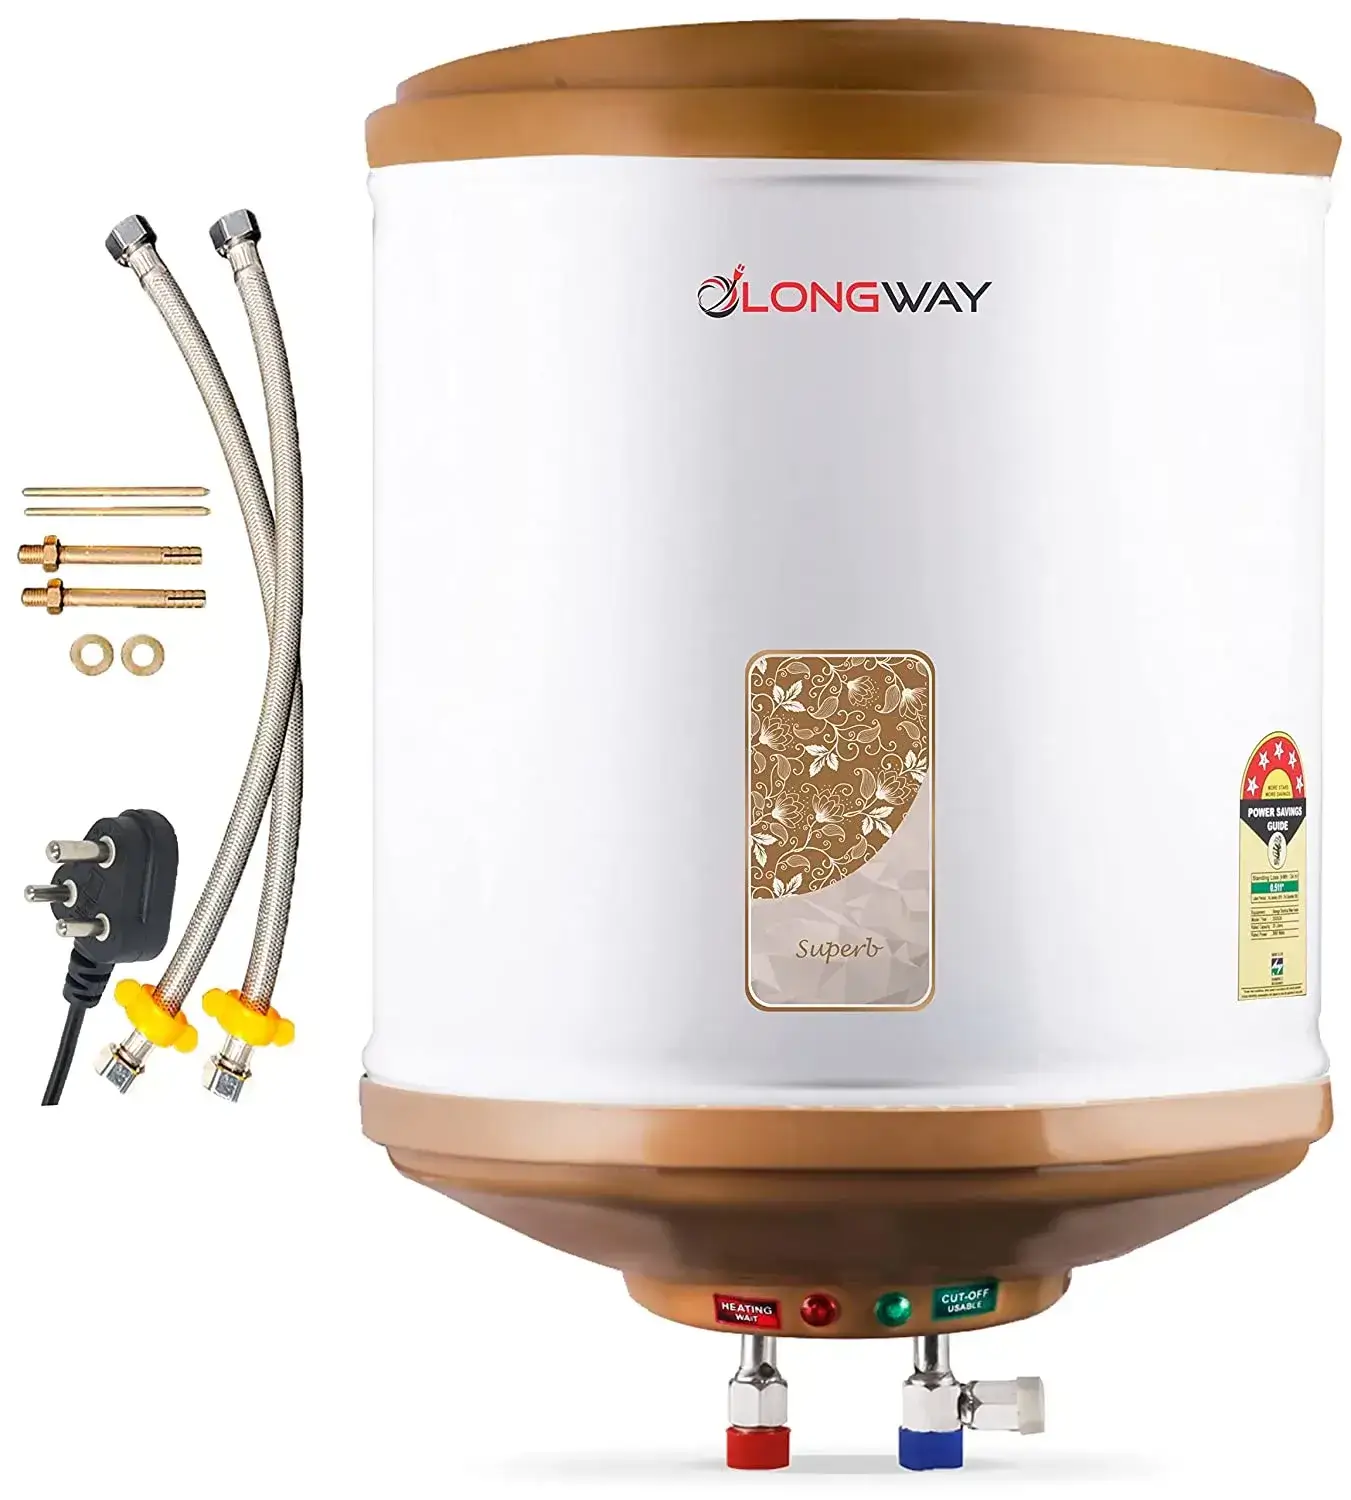 Install the new Instant Water Heater